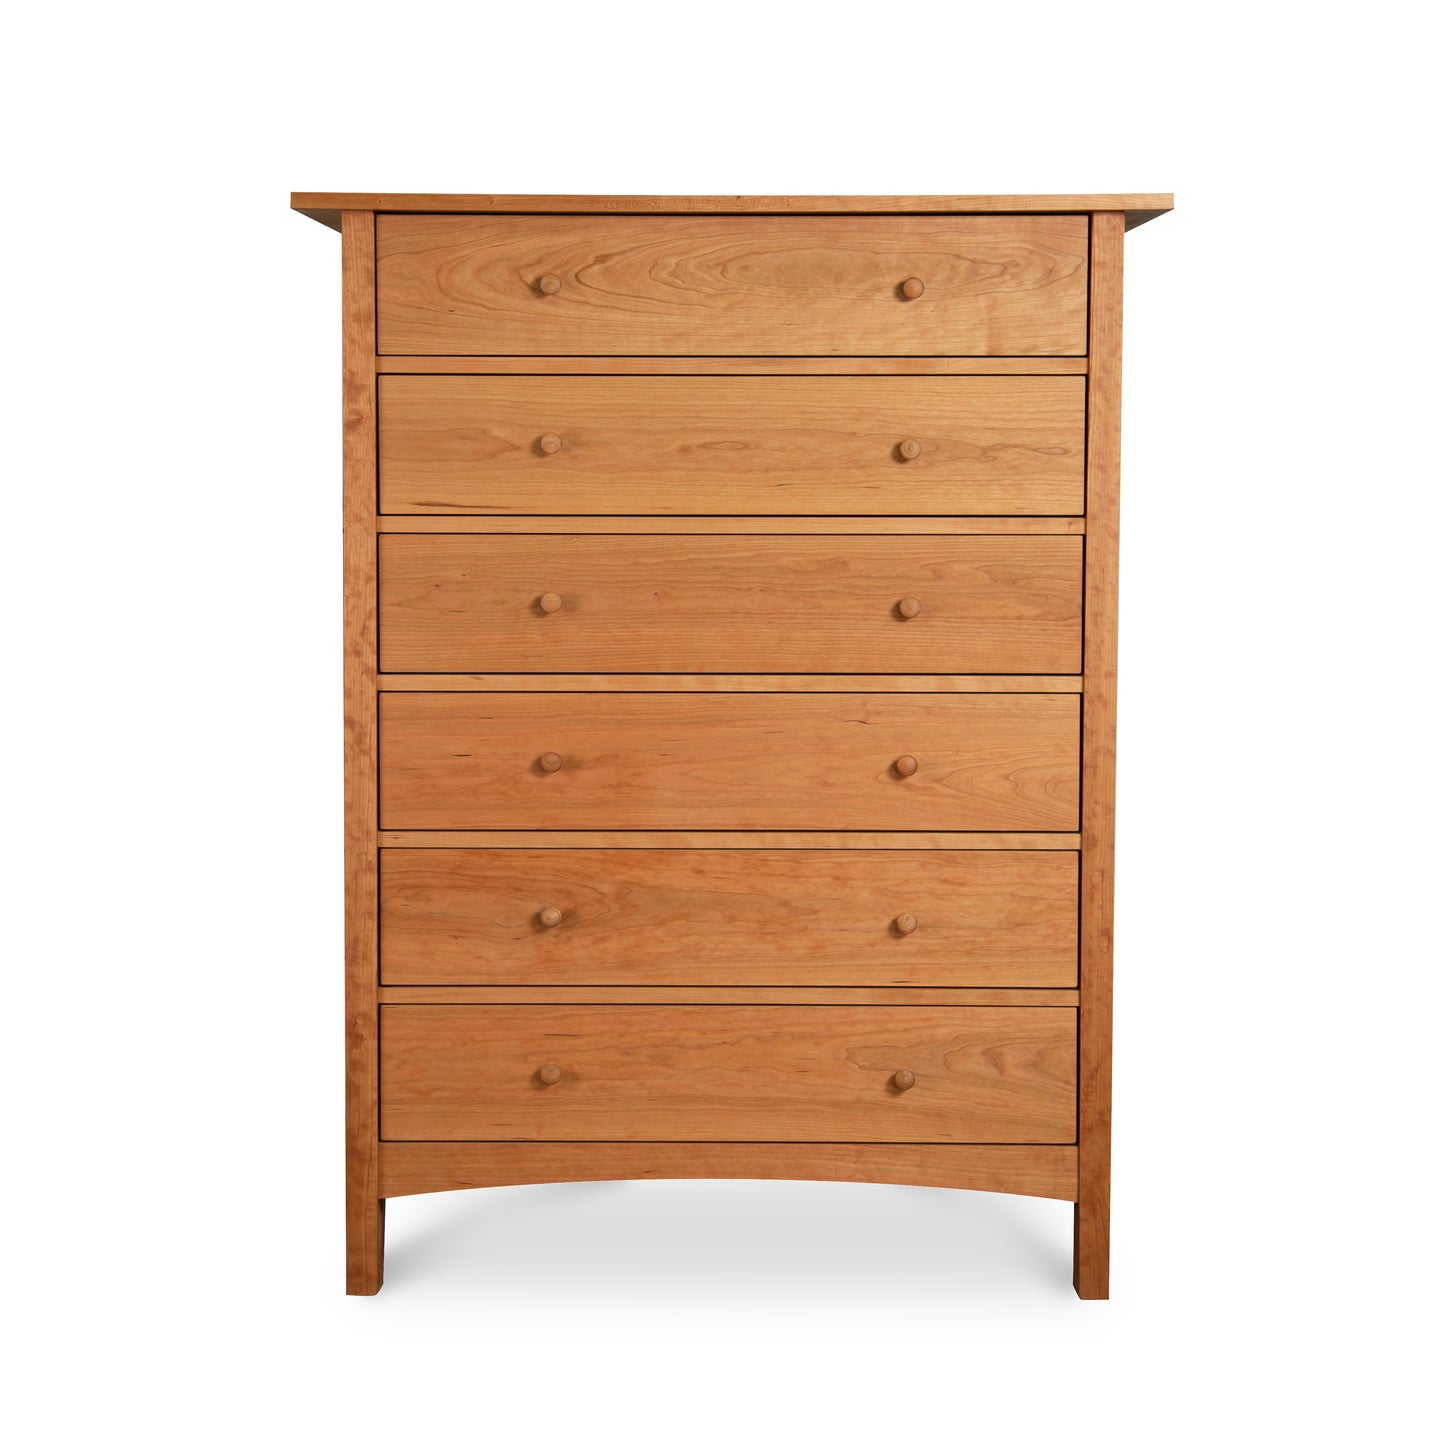 A solid wood six-drawer Vermont Furniture Designs Burlington Shaker Chest on a plain white background.